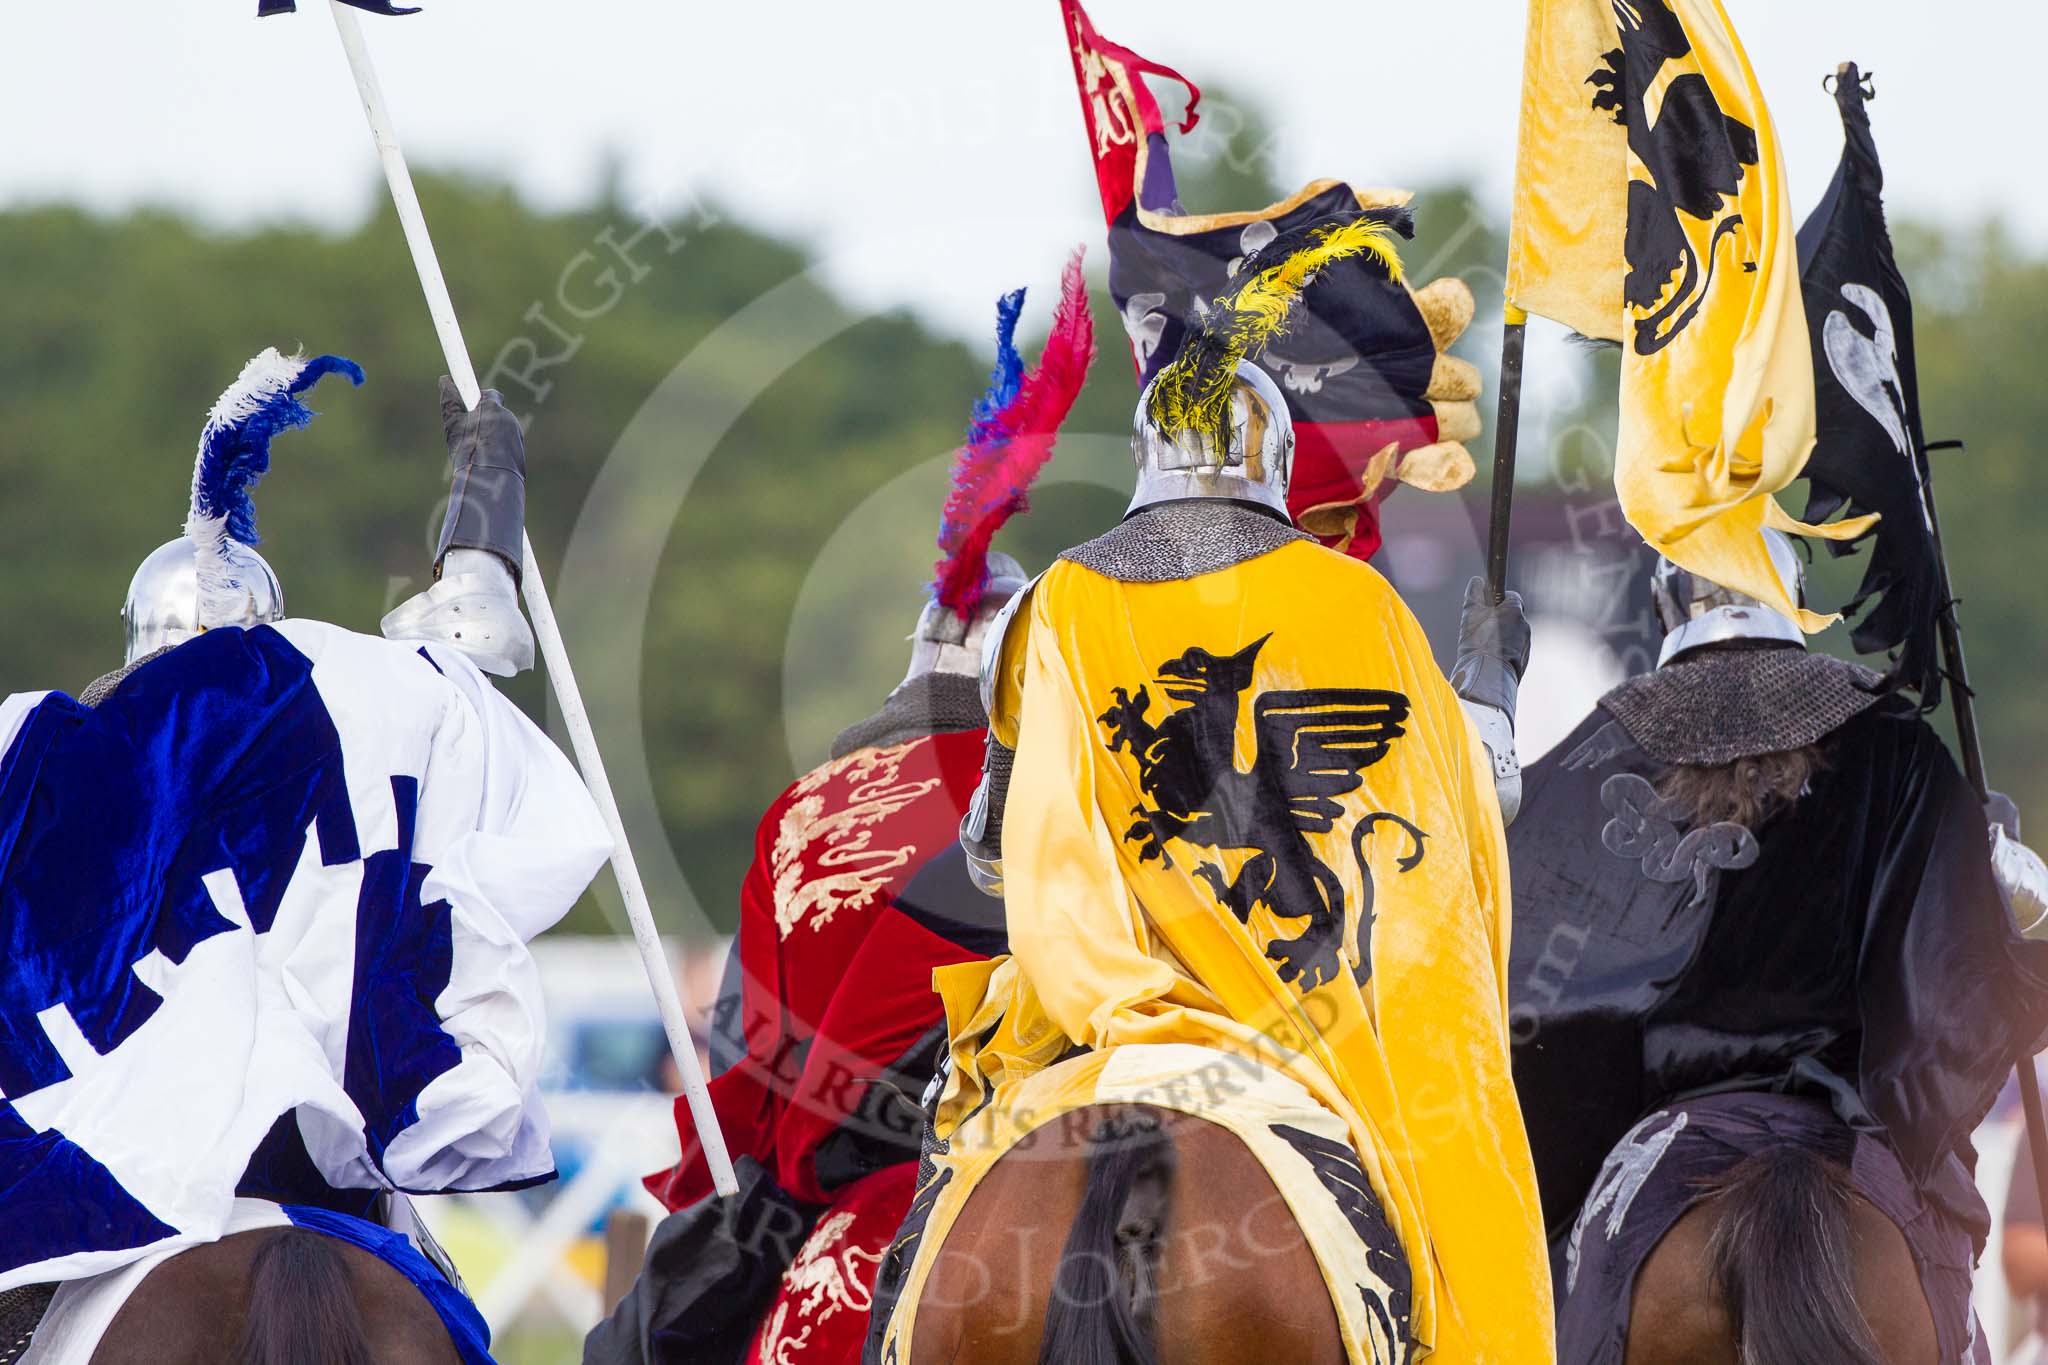 DBPC Polo in the Park 2013 - jousting display by the Knights of Middle England.
Dallas Burston Polo Club, ,
Southam,
Warwickshire,
United Kingdom,
on 01 September 2013 at 15:19, image #447